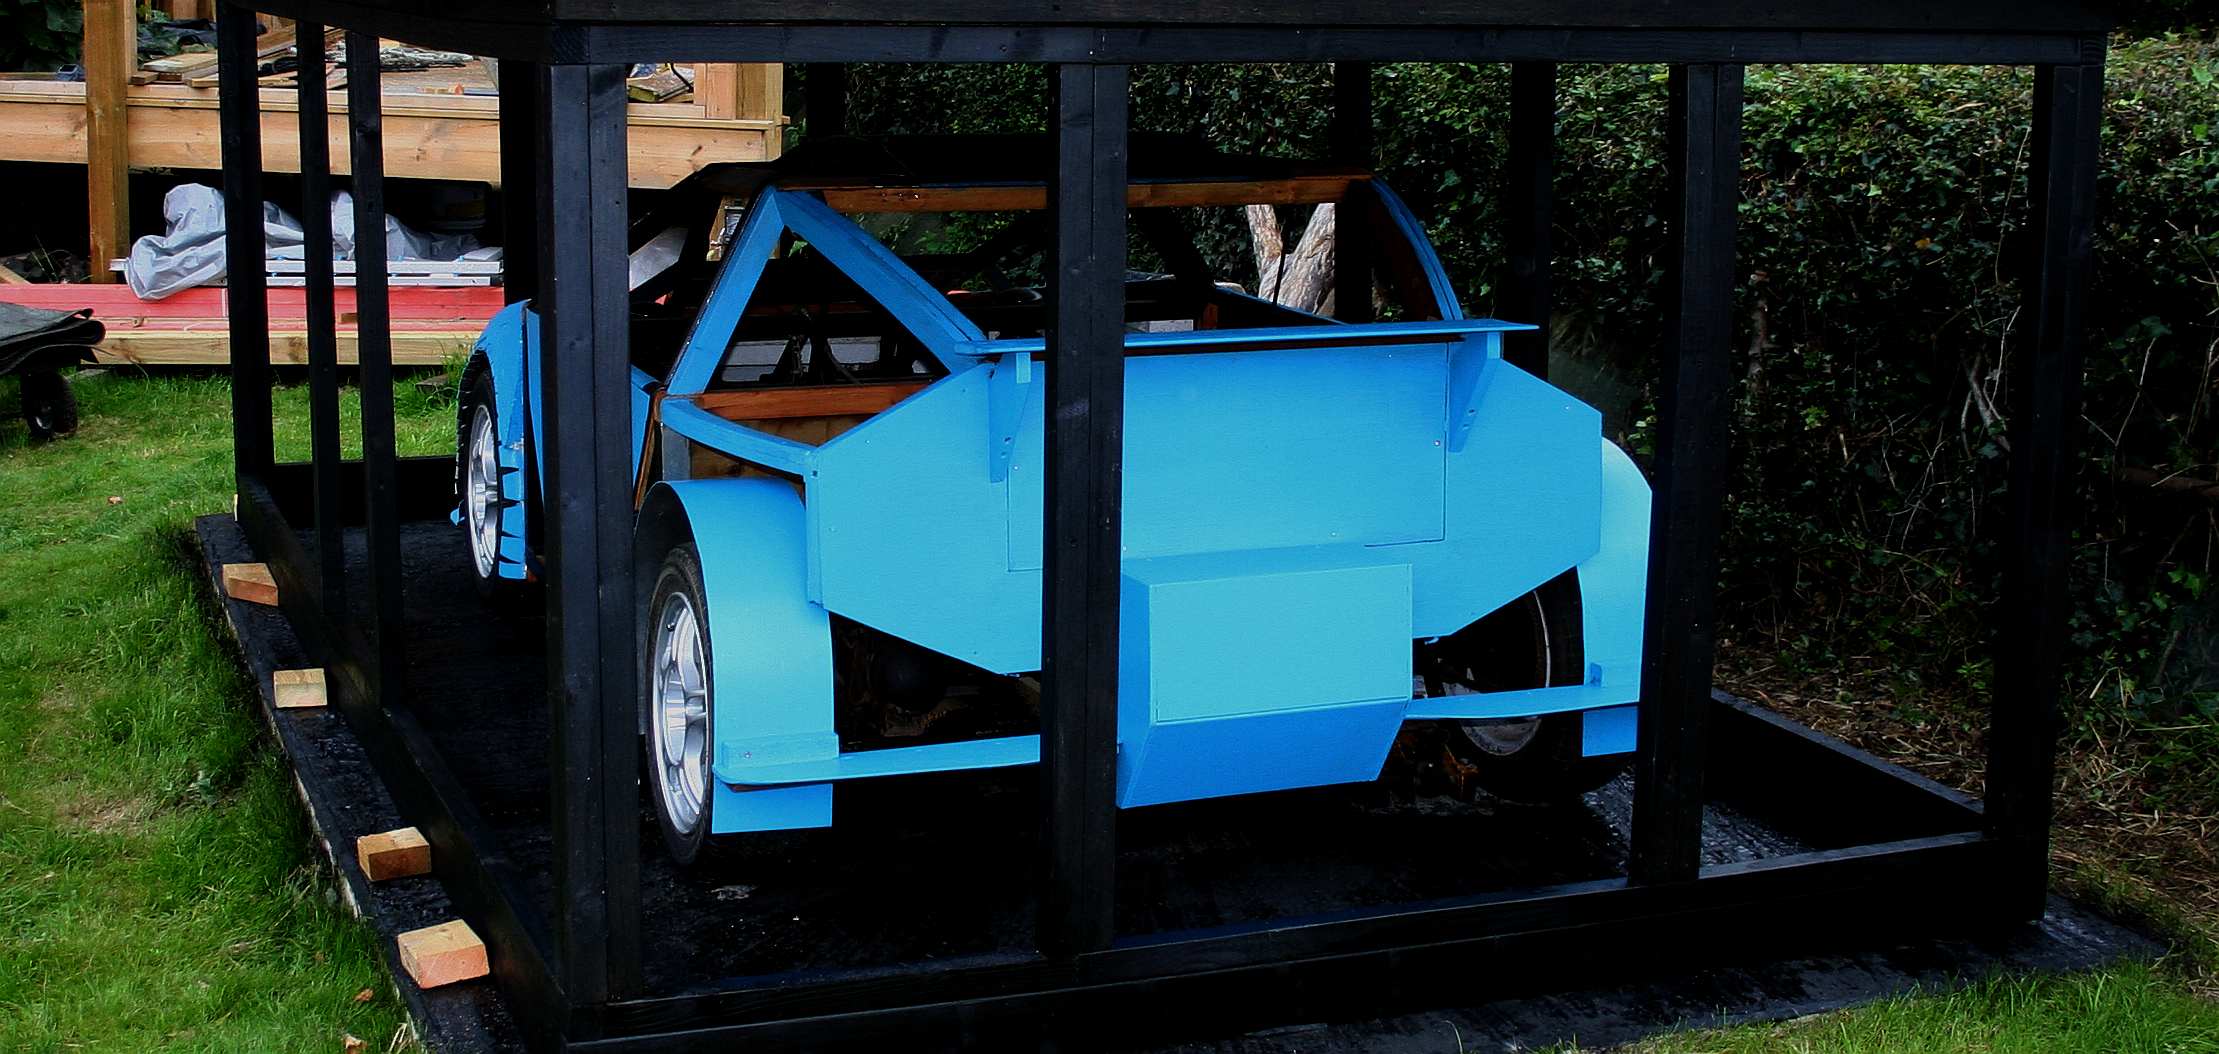 Solar assisted electric sports car project in storage for now